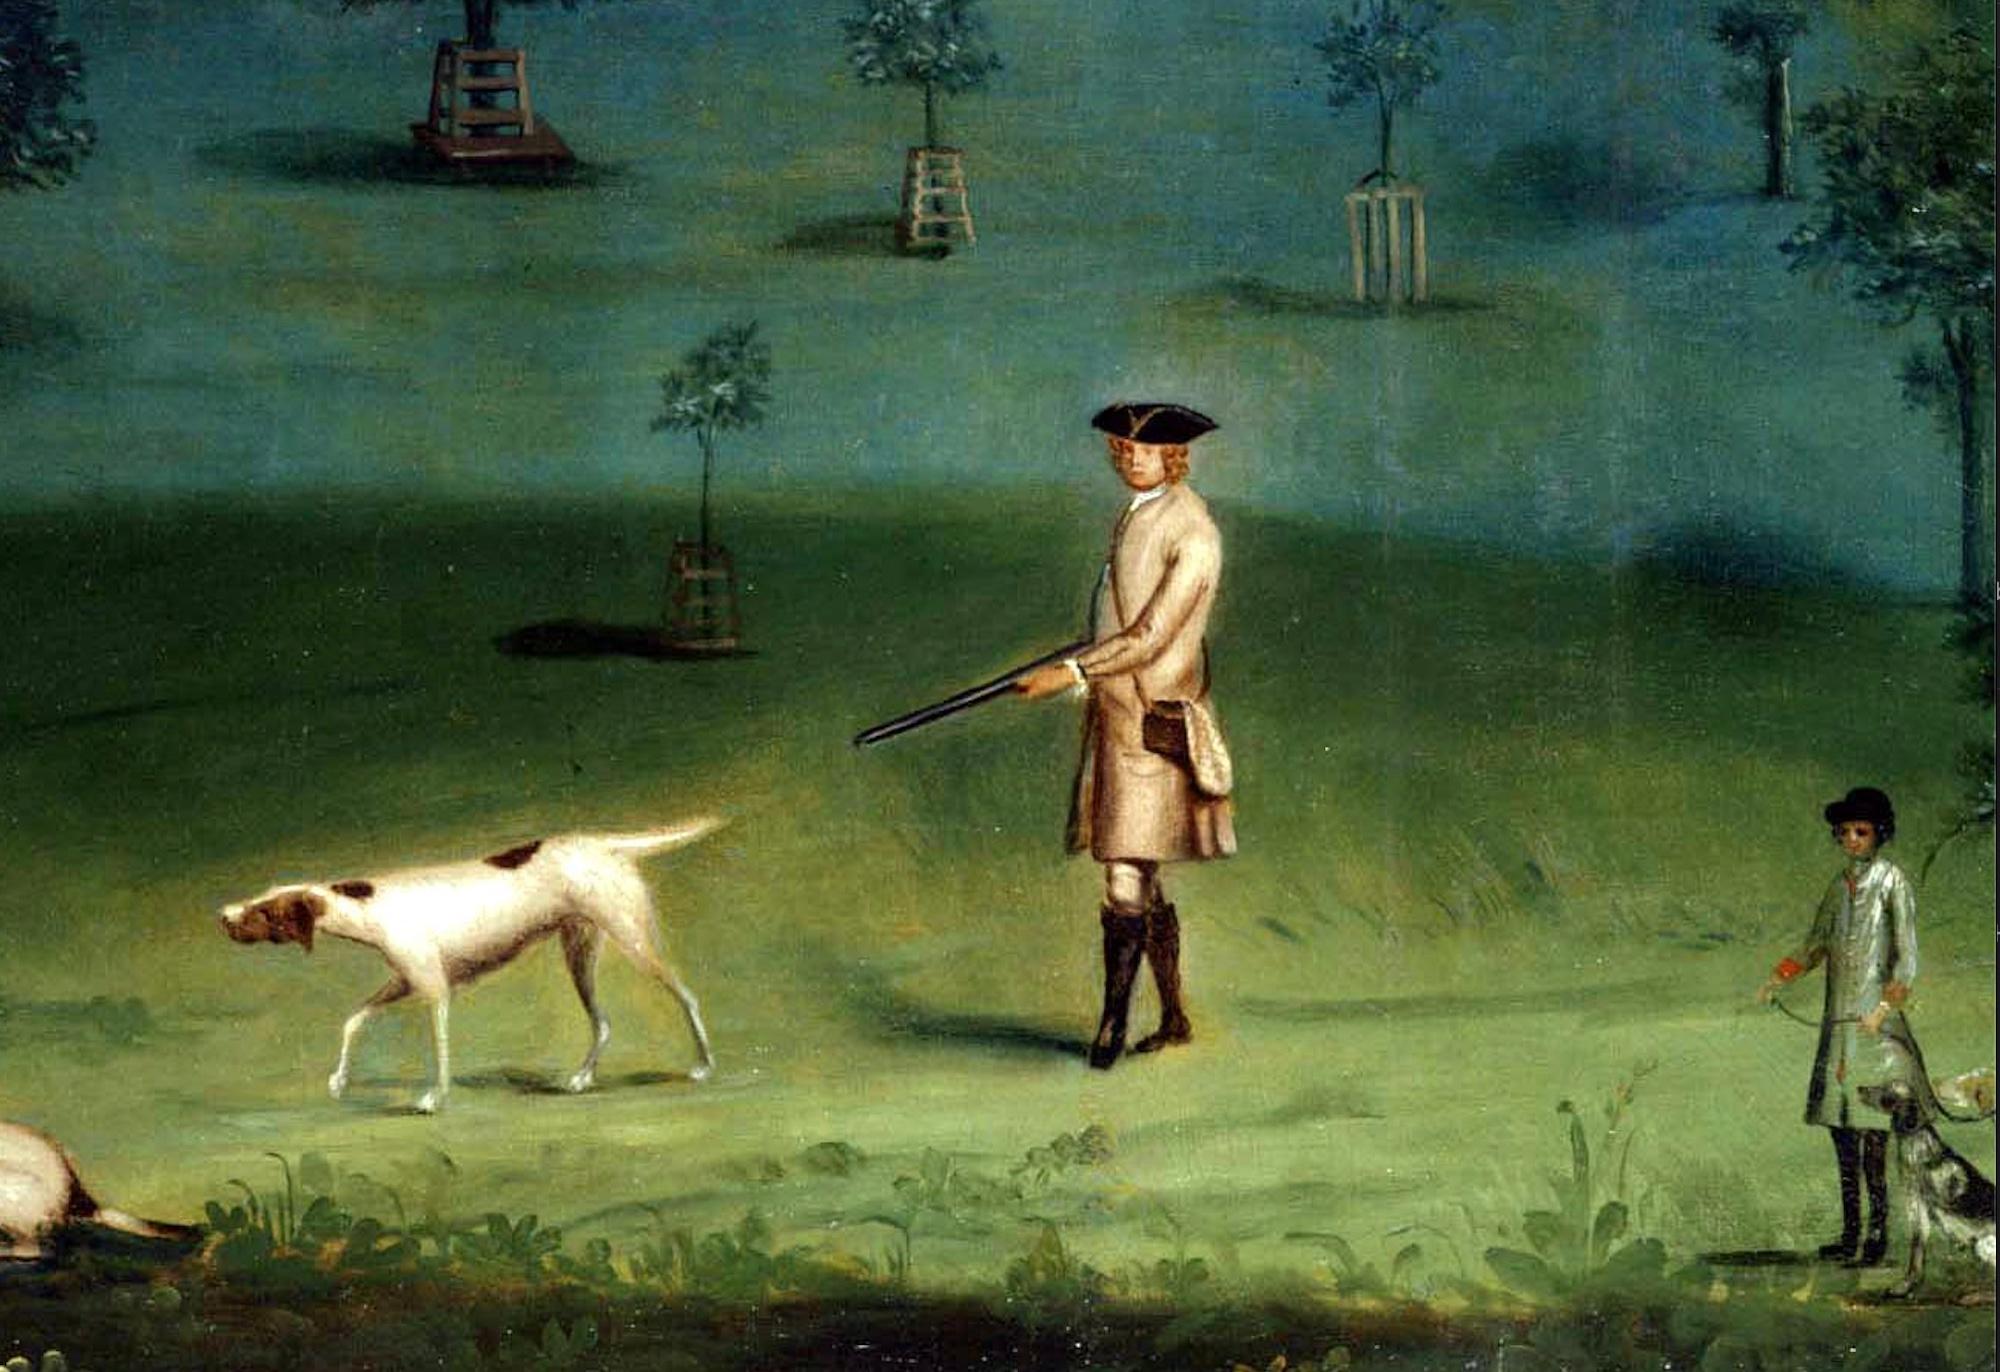 A gentleman shooting in a landscape, with a country house beyond - Painting by Francis Sartorius